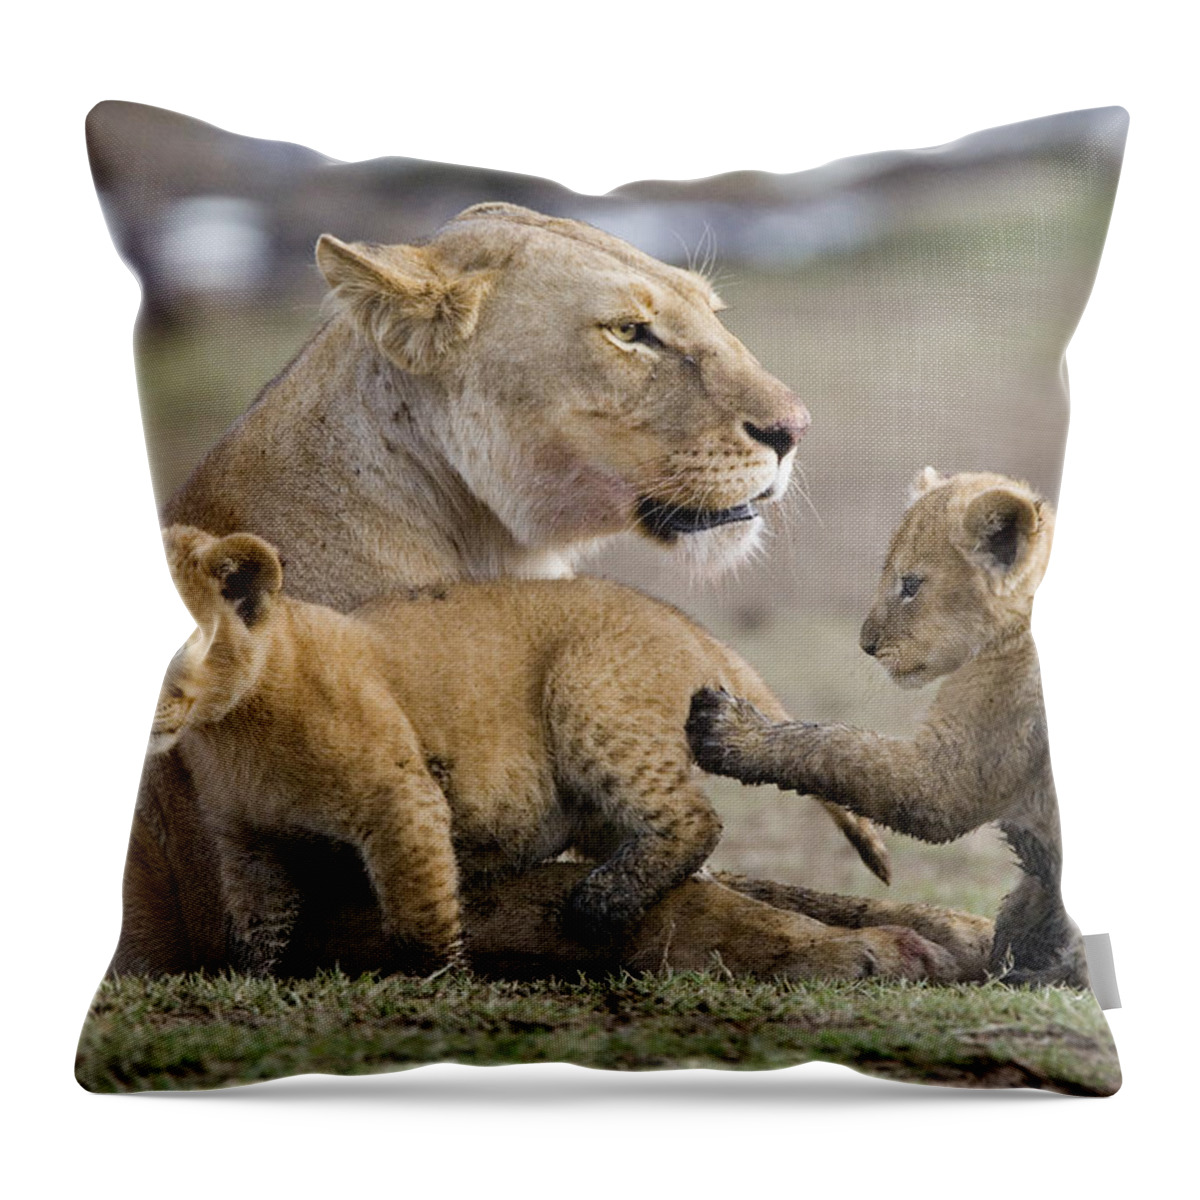 00761303 Throw Pillow featuring the photograph African Lion Playful Cubs With Mother by Suzi Eszterhas